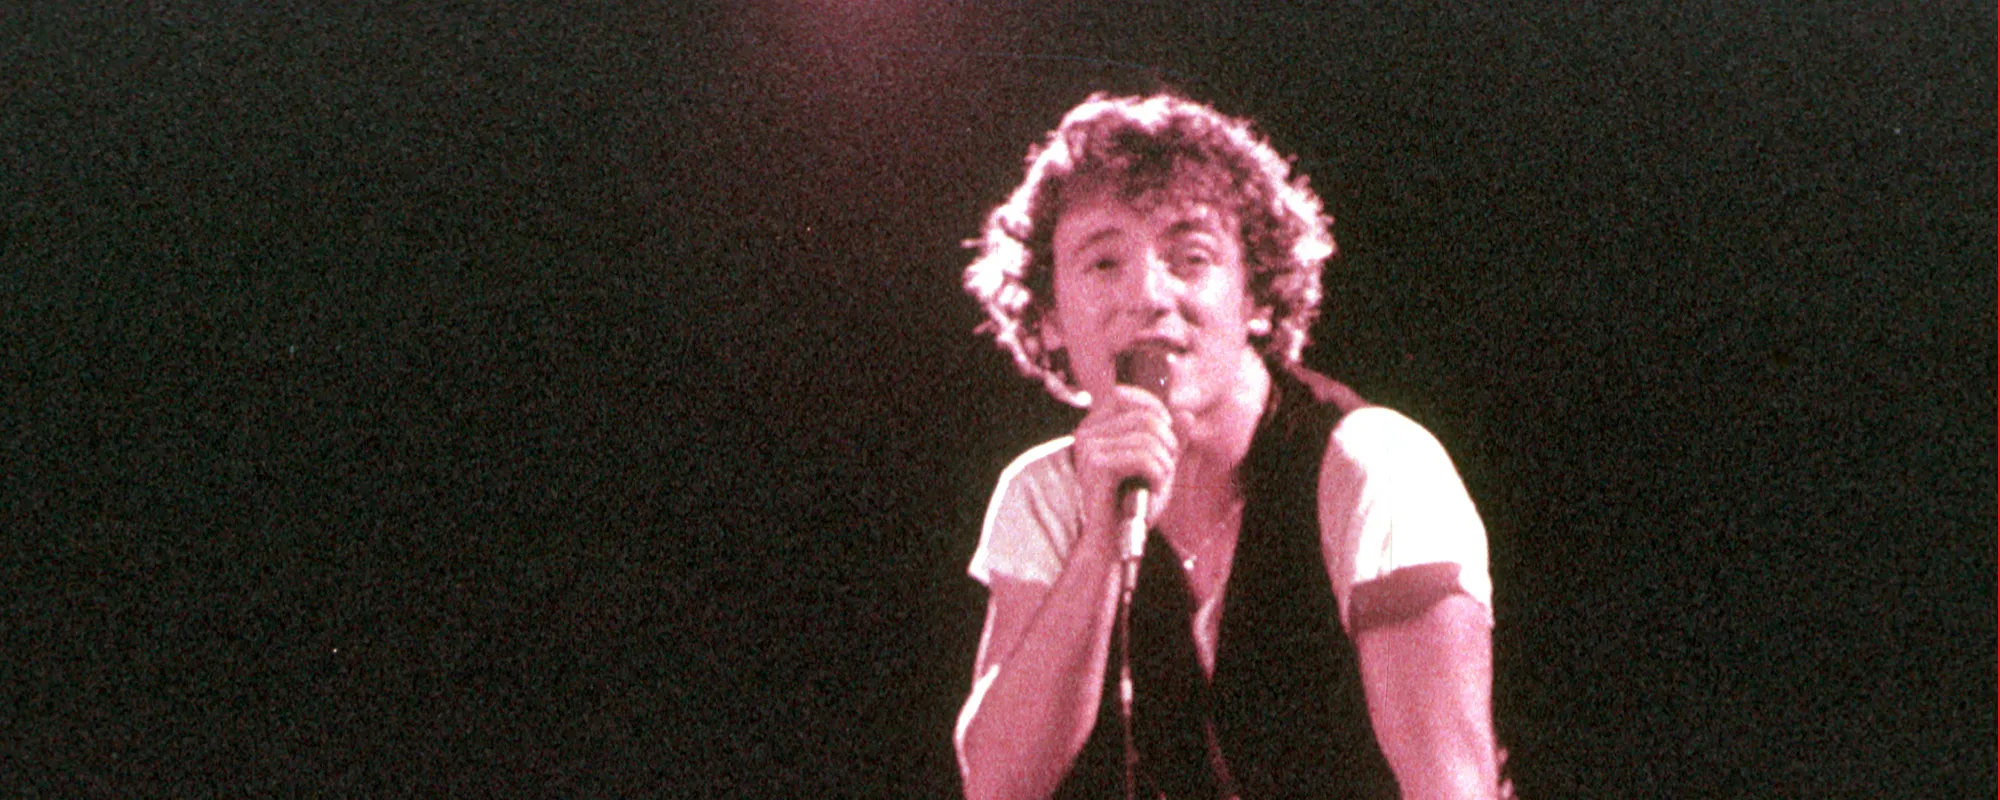 5 Essential Albums and Projects Featuring Bruce Springsteen